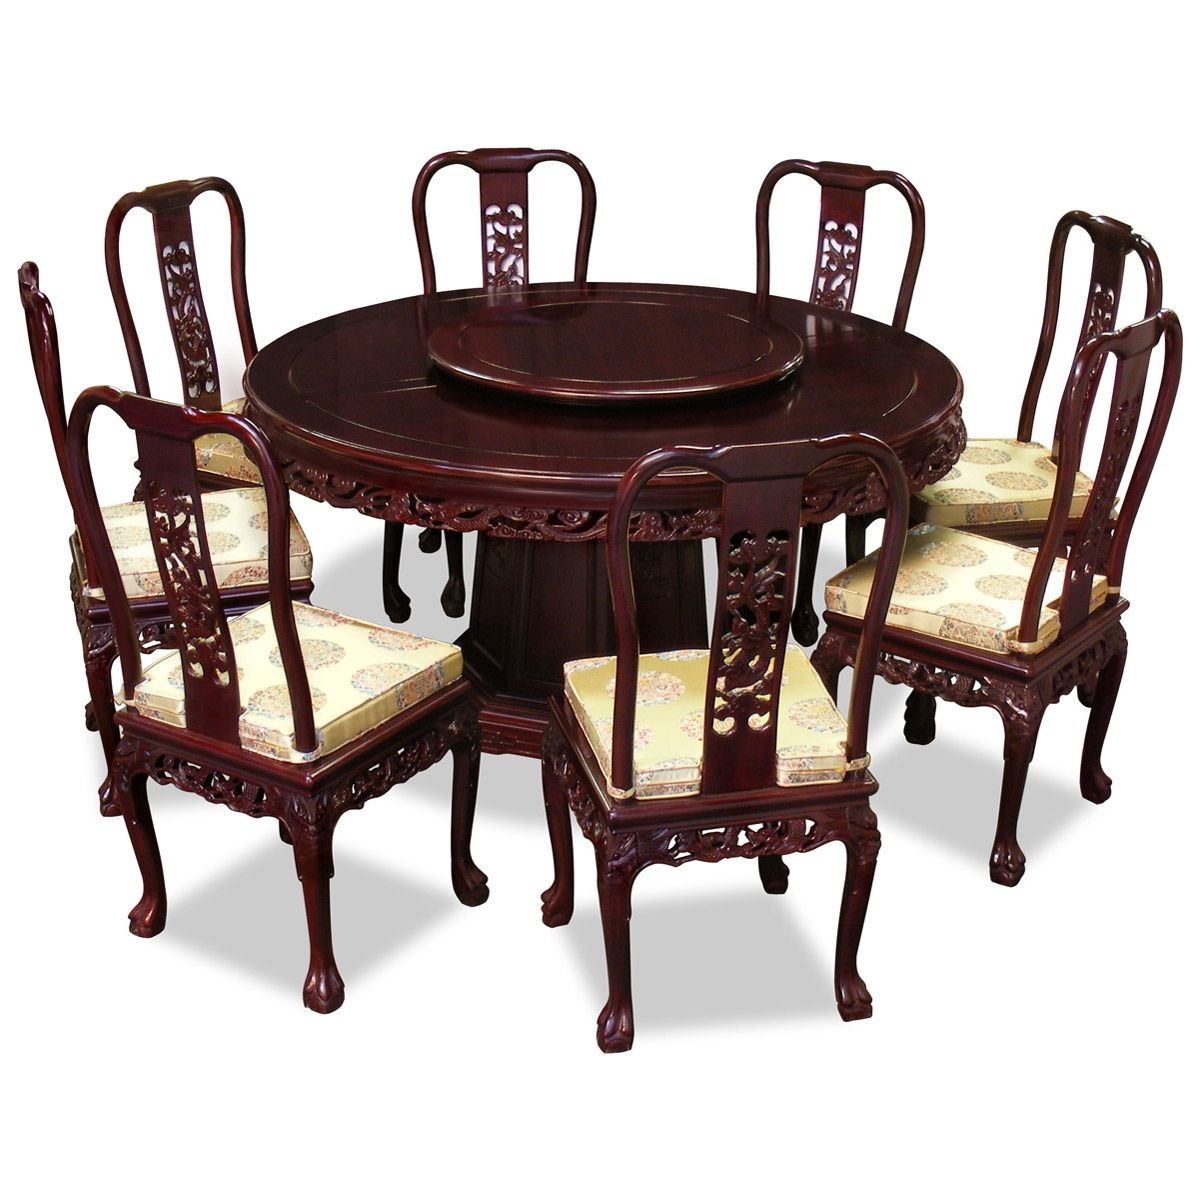 Round dining table for eight people outstanding 60 inch round